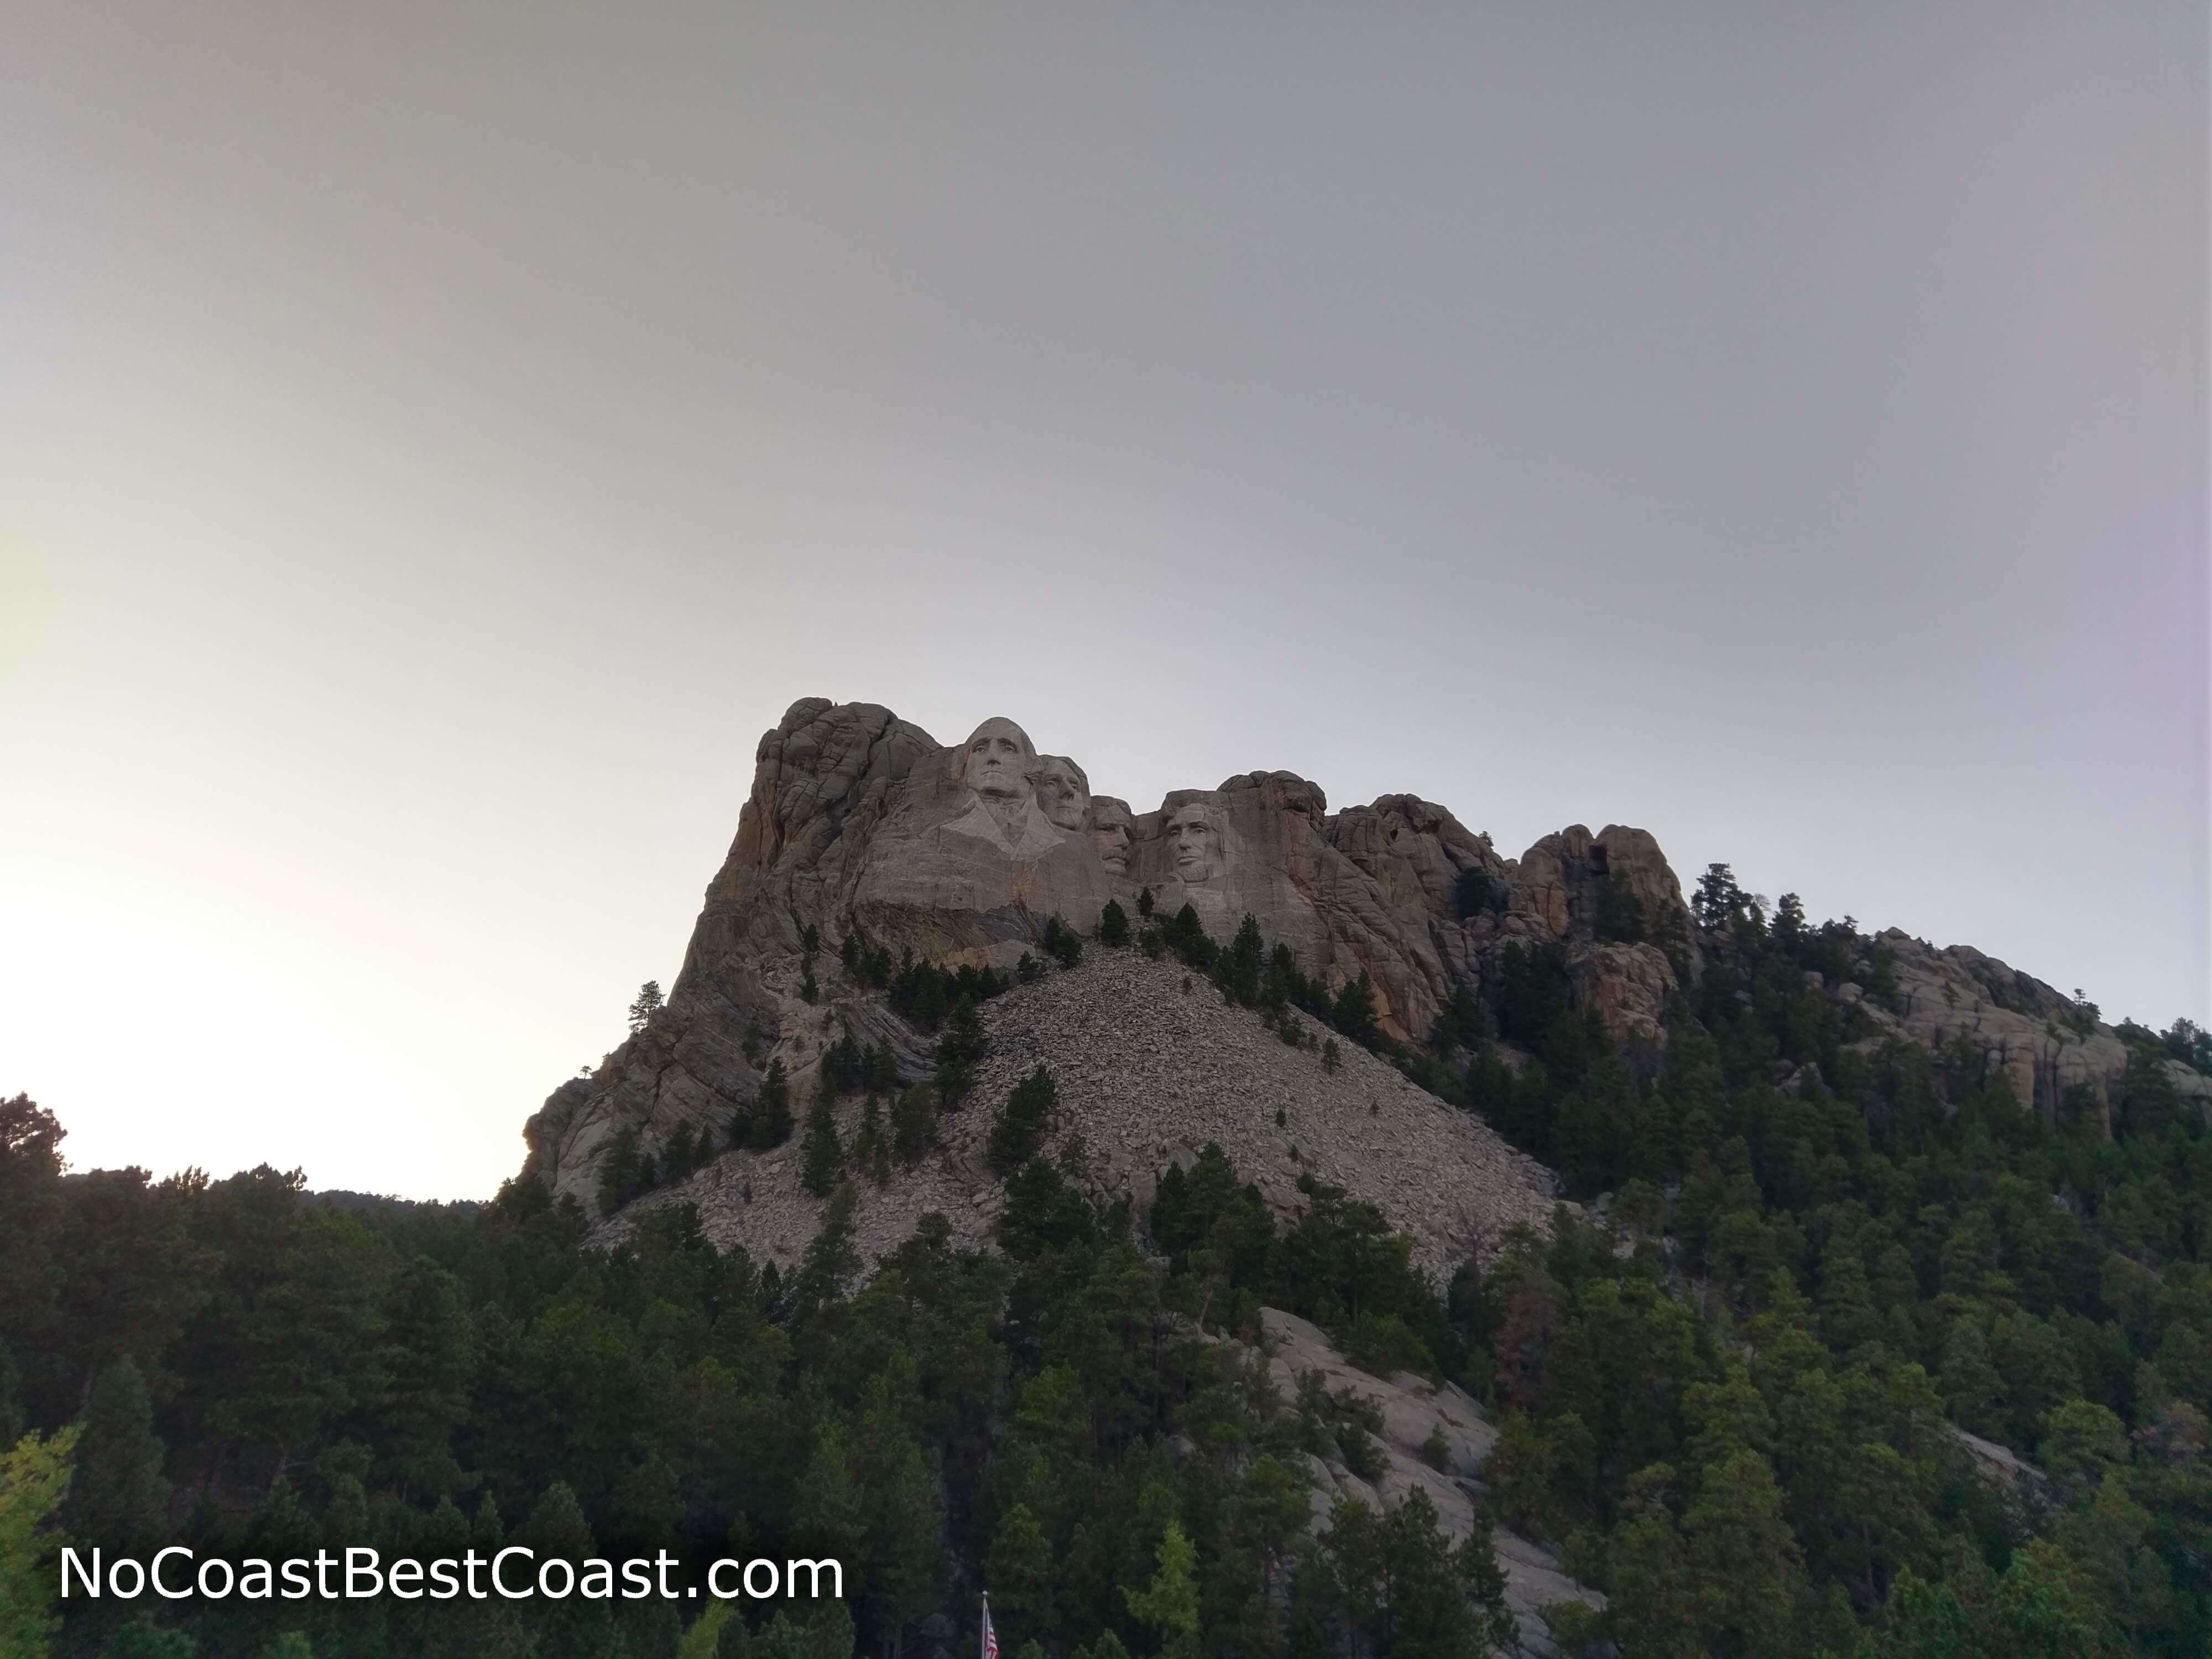 The iconic Mount Rushmore National Memorial